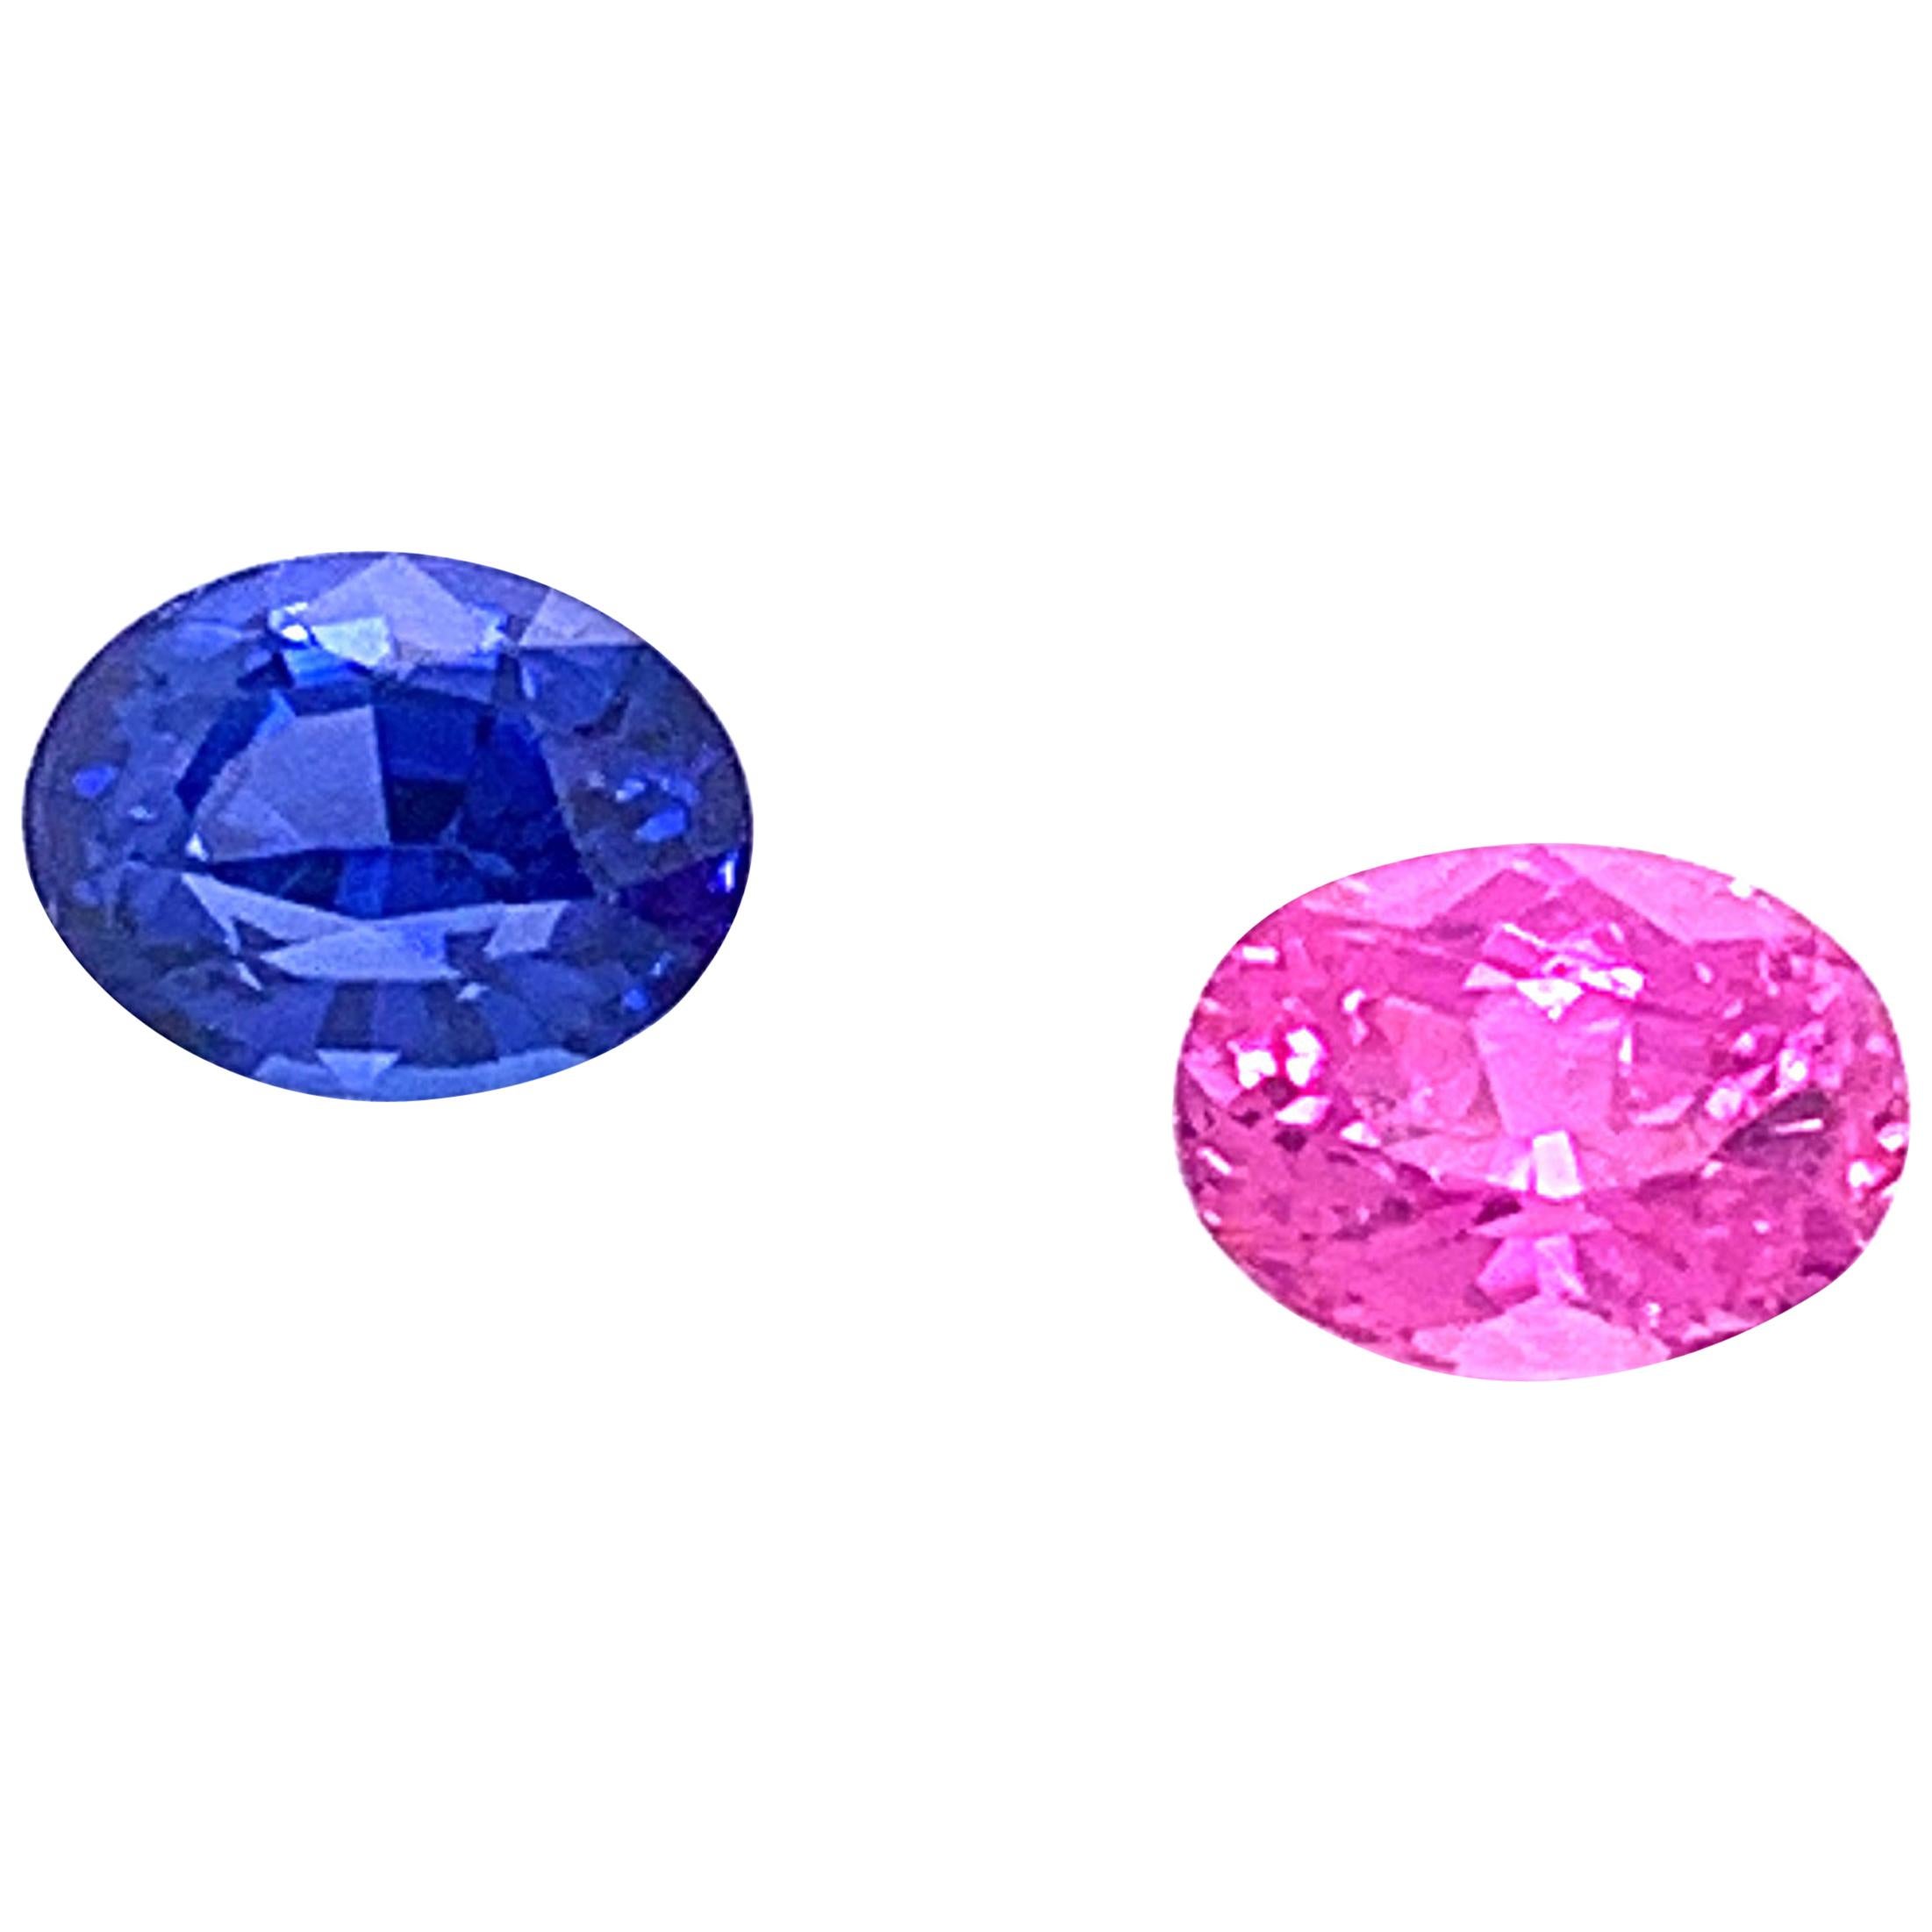 2.70 Carat Oval Shaped Blue and Pink Sapphire, Pair For Sale